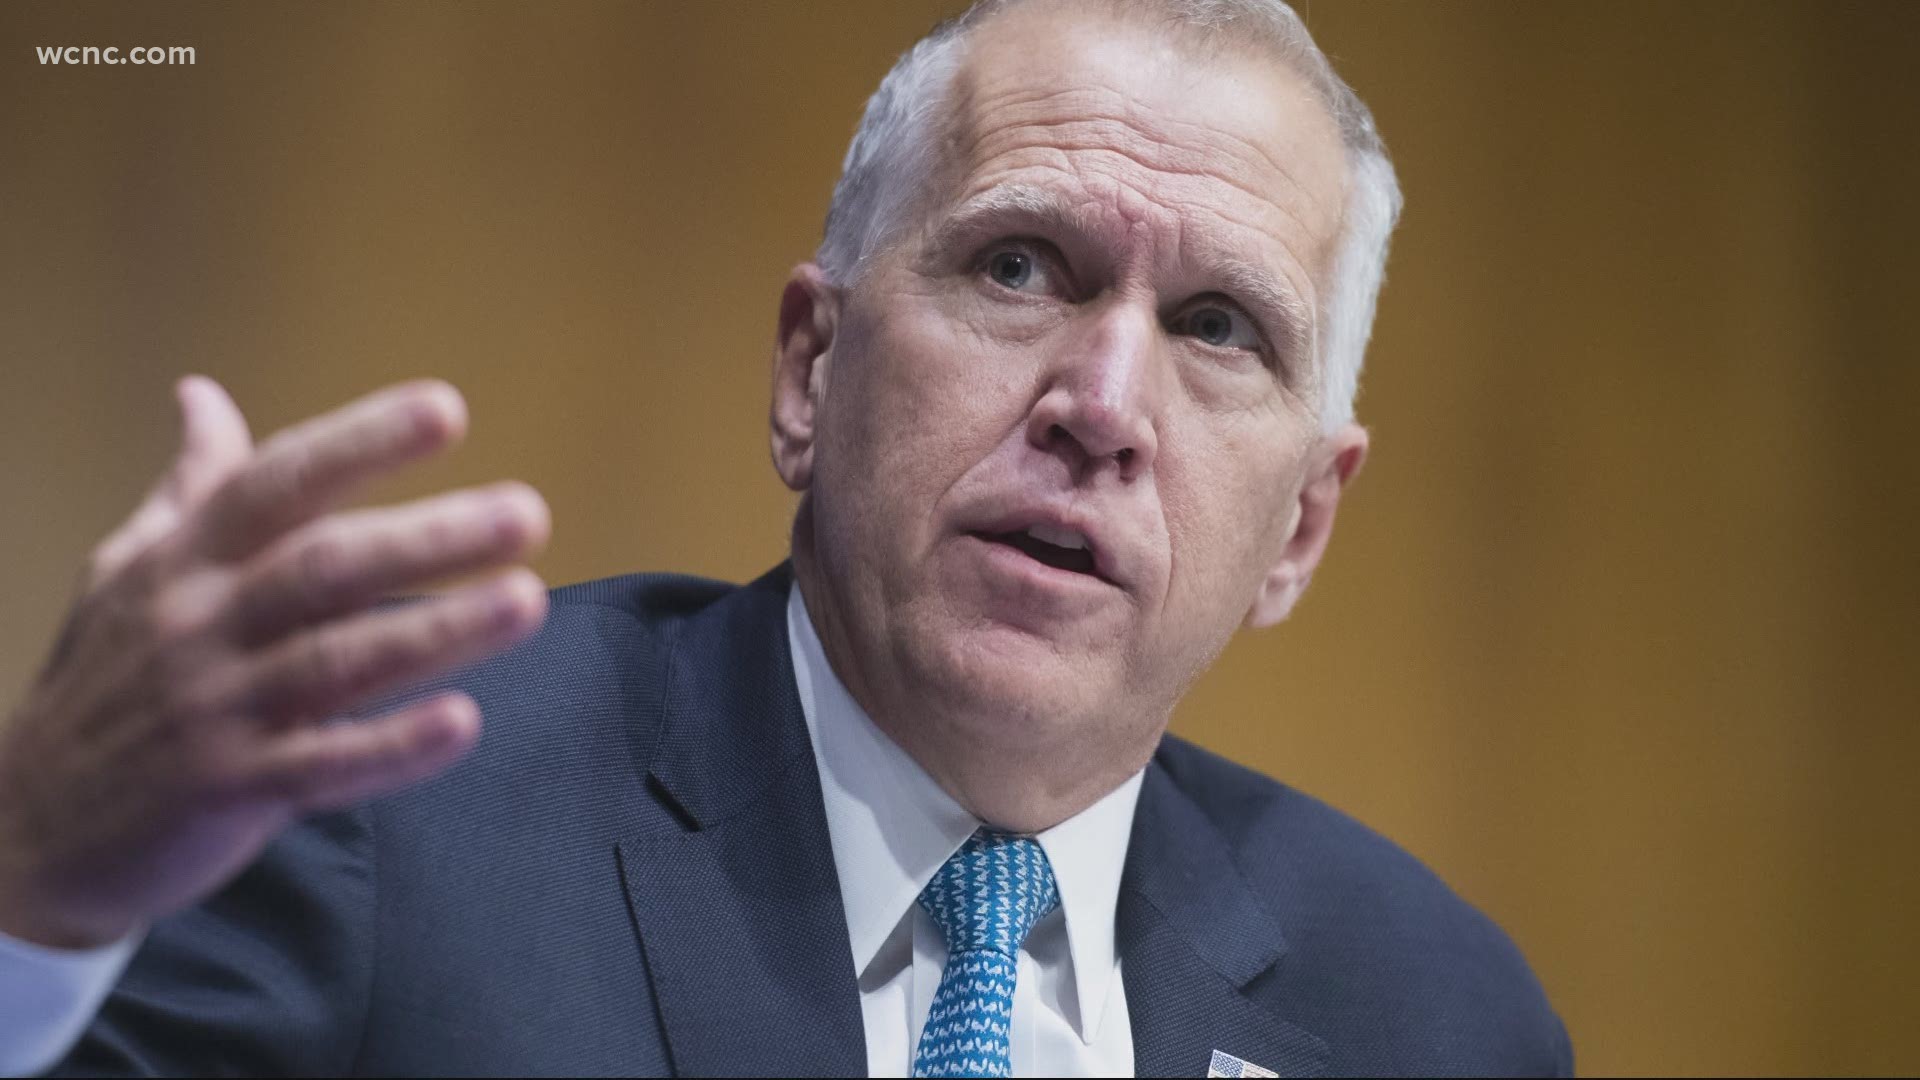 North Carolina U.S. Senator Thom Tillis is among those connected to the White House who have tested positive for the coronavirus.